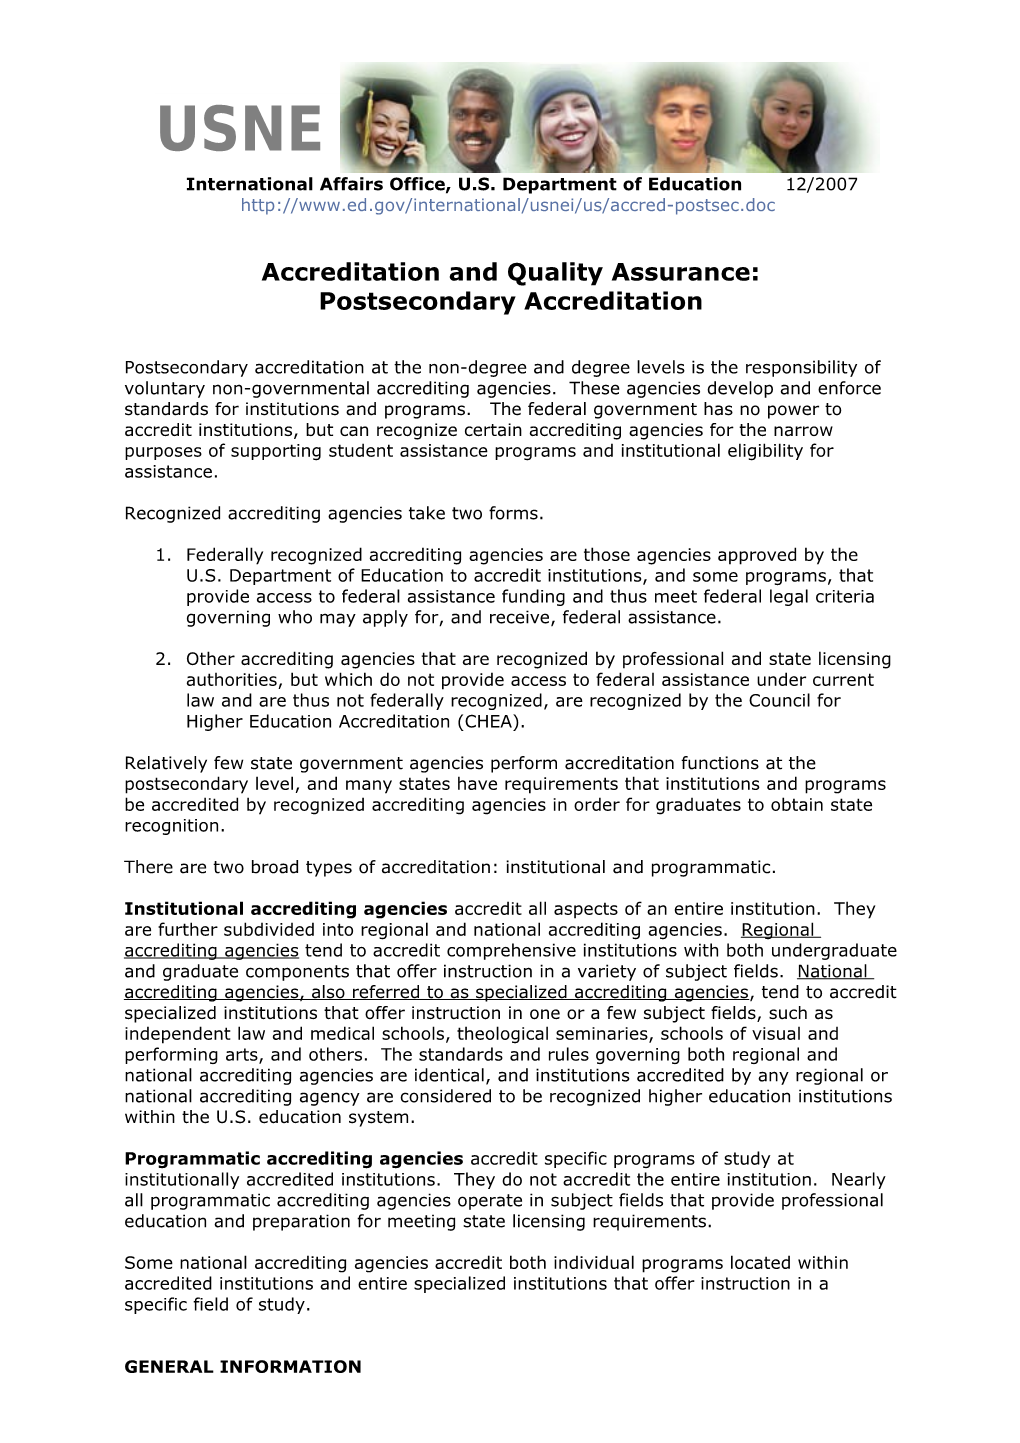 Accreditation and Quality Assurance: Postsecondary Accreditation (MS Word)